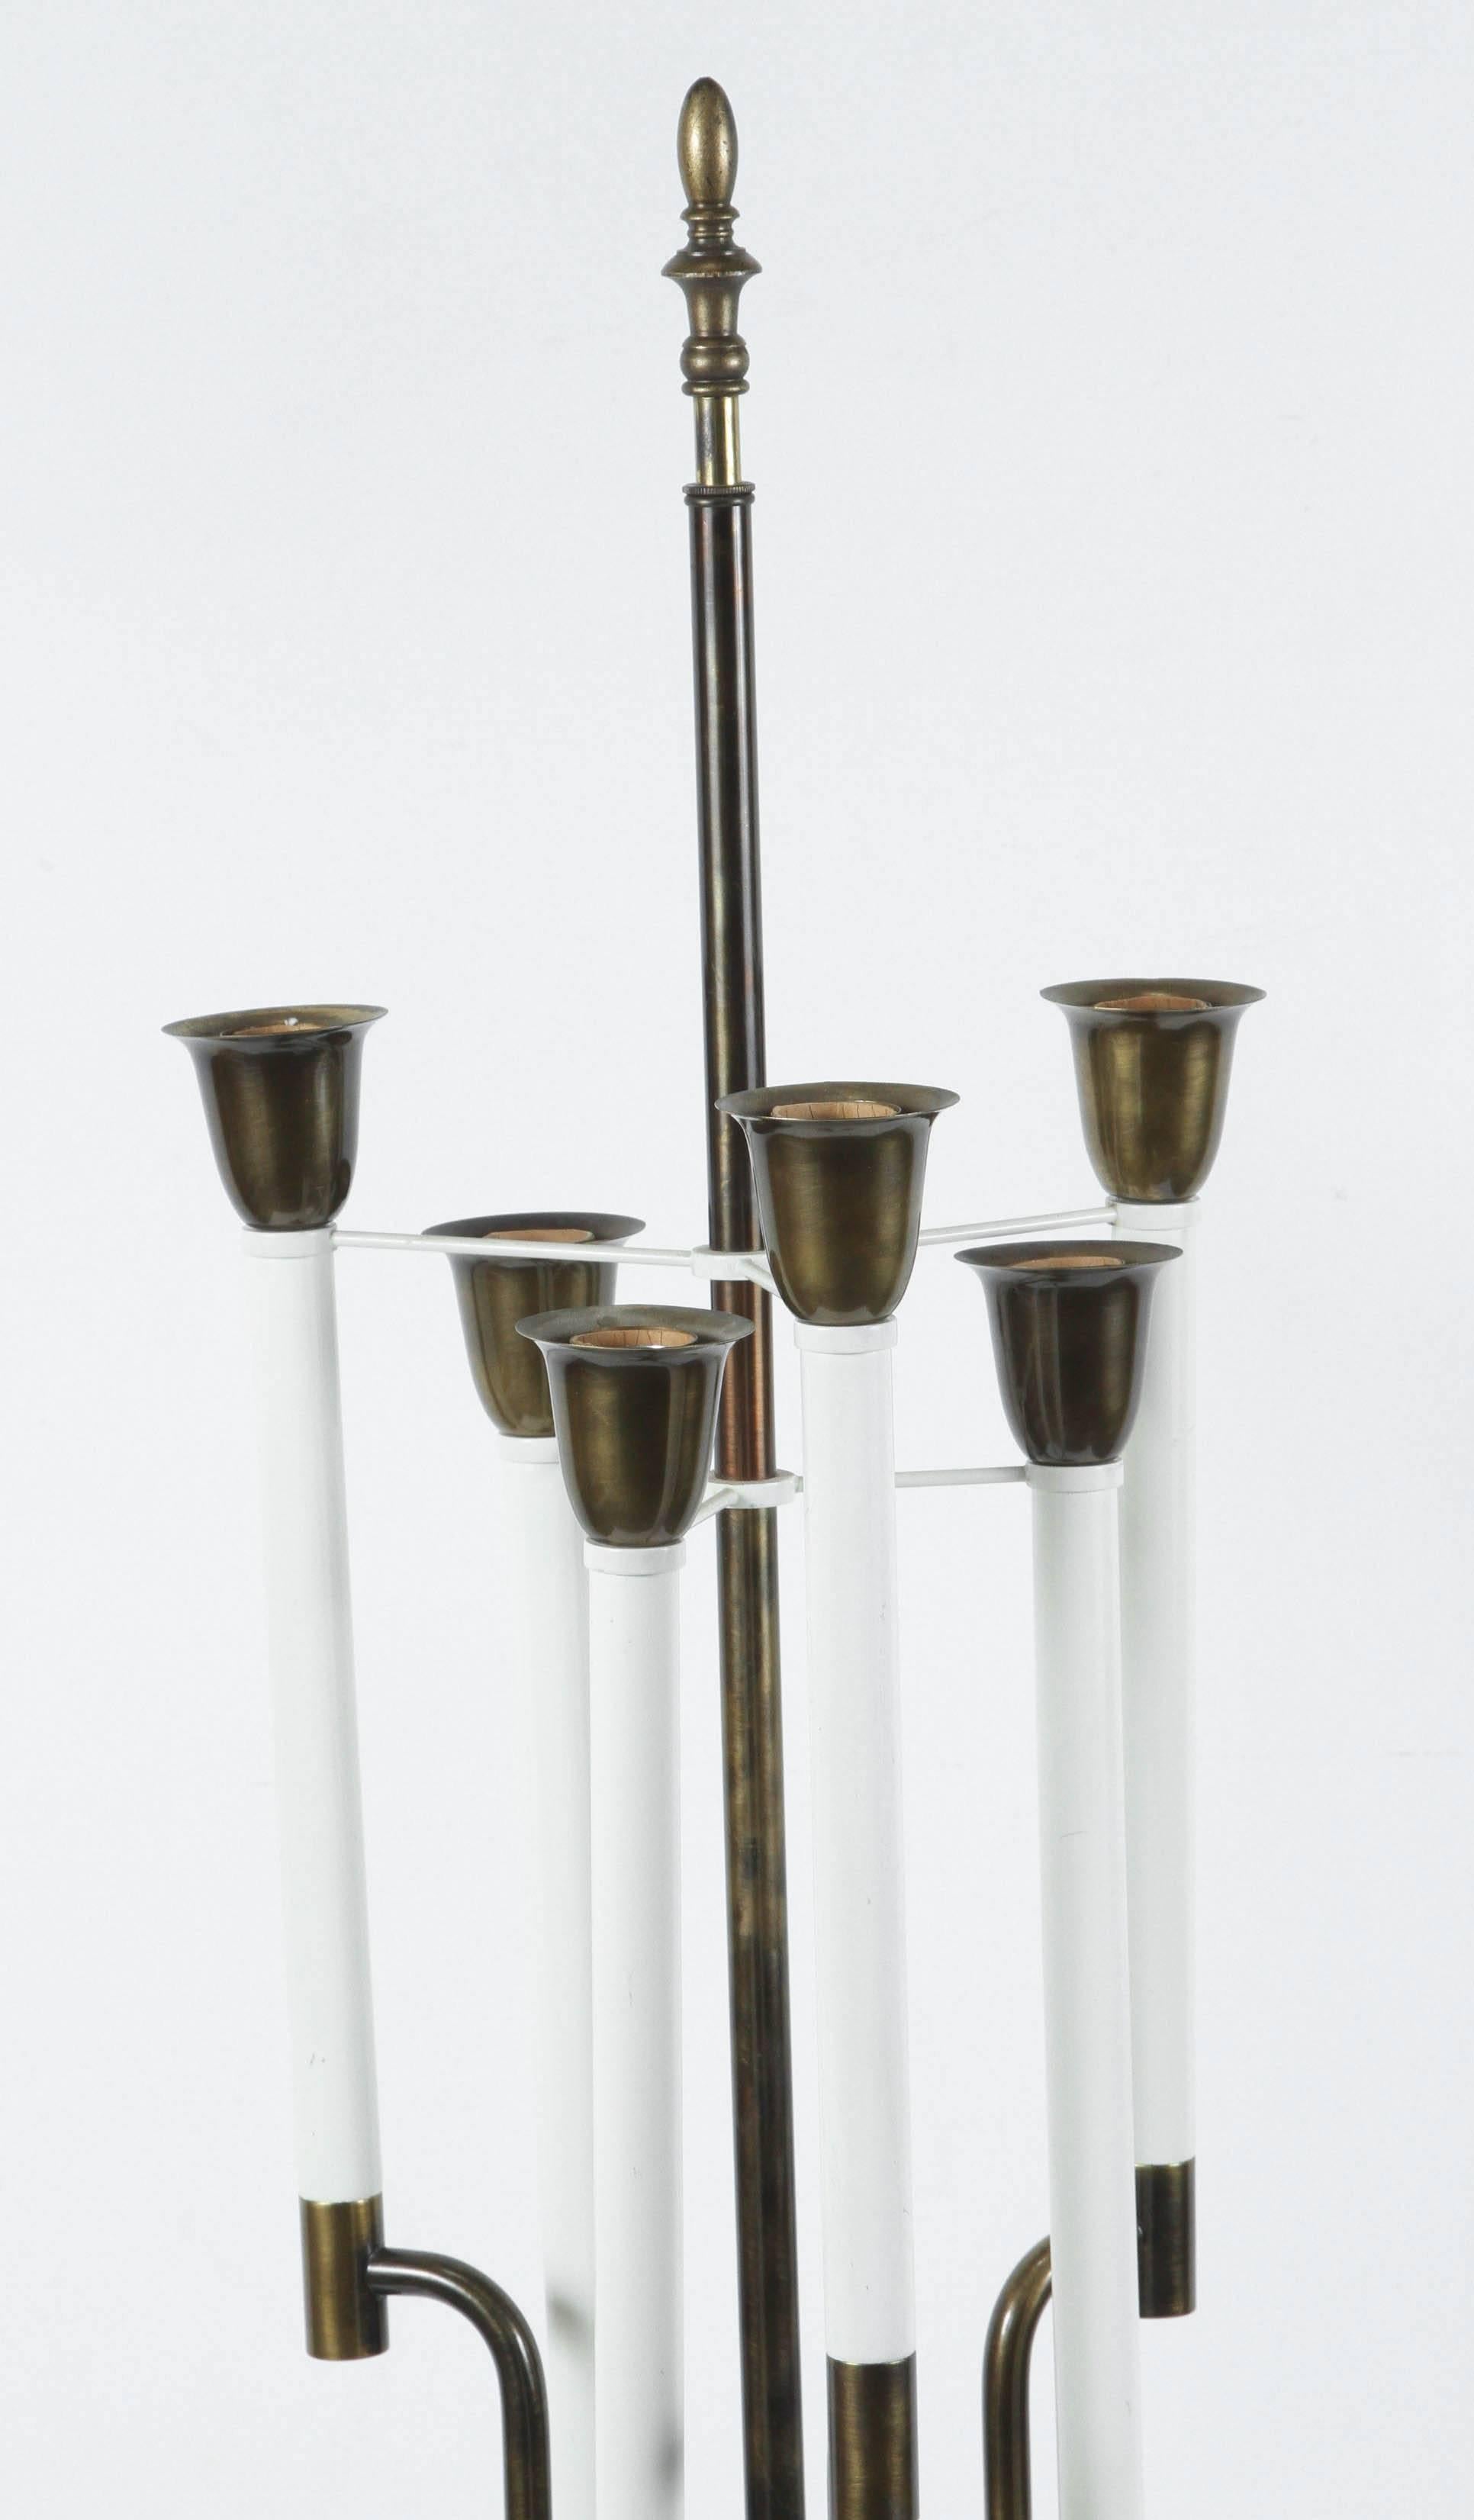 Monumental Mid Century Tommi Parzinger for Stiffel White, Brass and Marble Candelabra Lamps, 1940s.
Substantial Stiffel Lamp Company brass and white marble candlestick table lamp in the style of Tommi Parzinger.
Featuring a round six candlestick